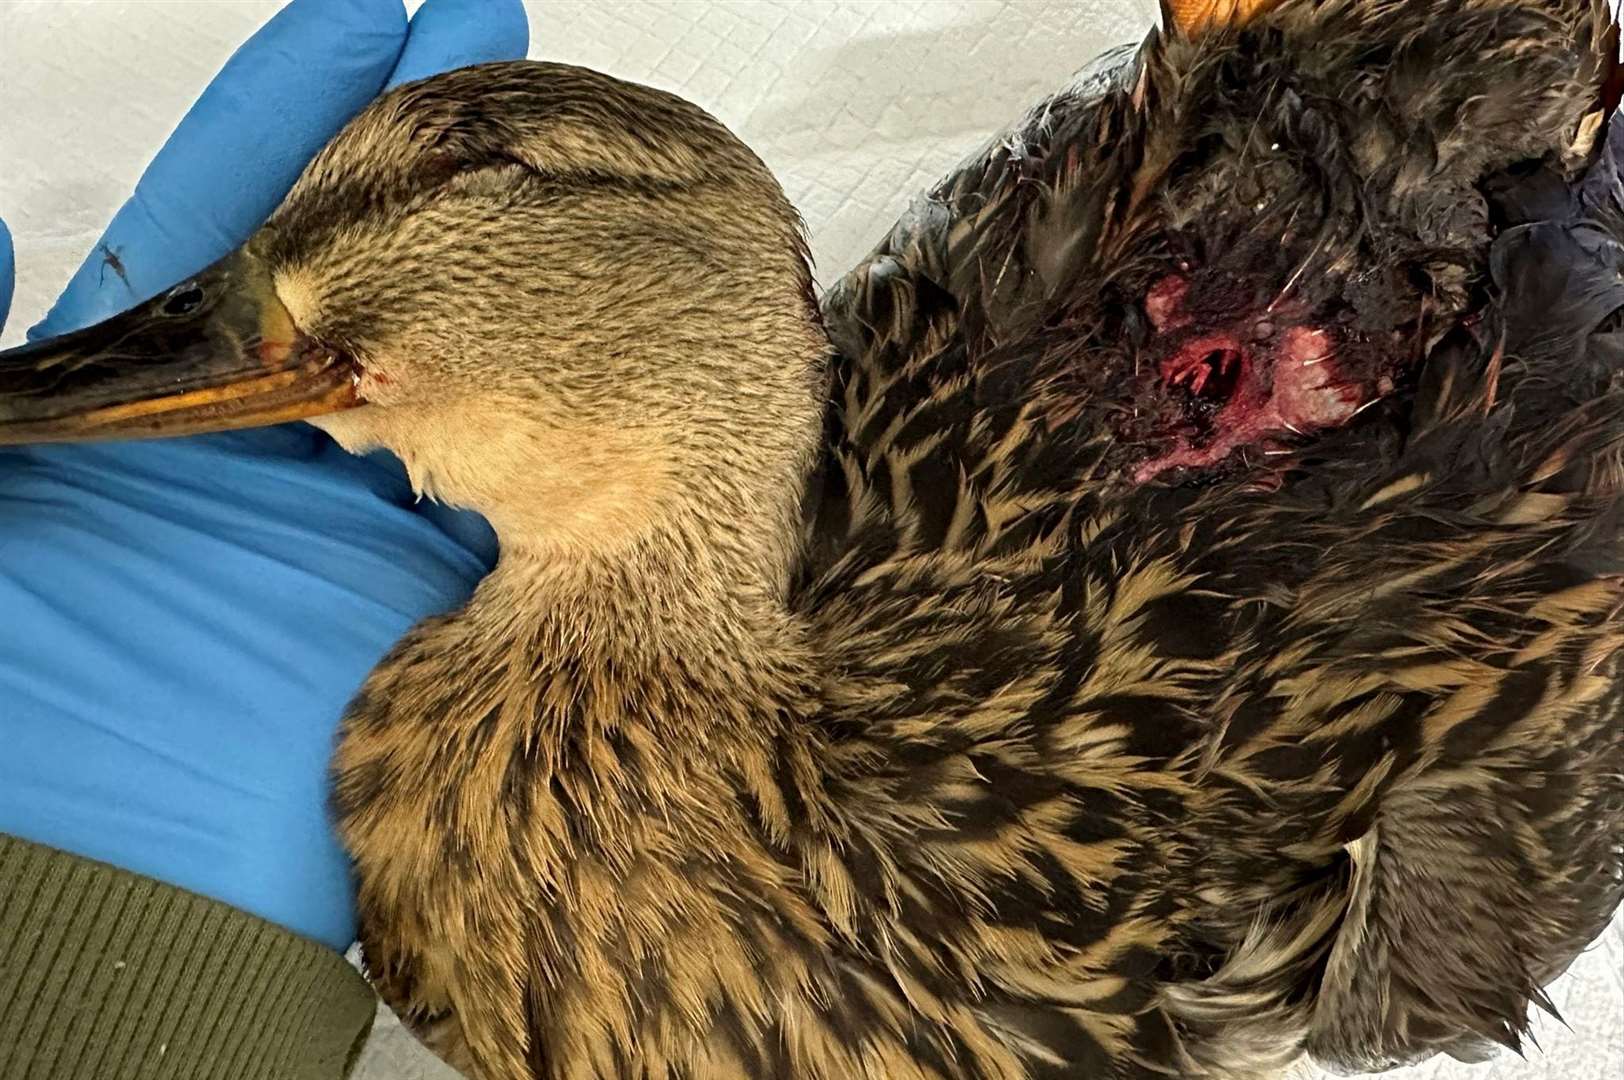 One of the injuries the duck suffered in the attack. Picture: Columbines Wildlife Care